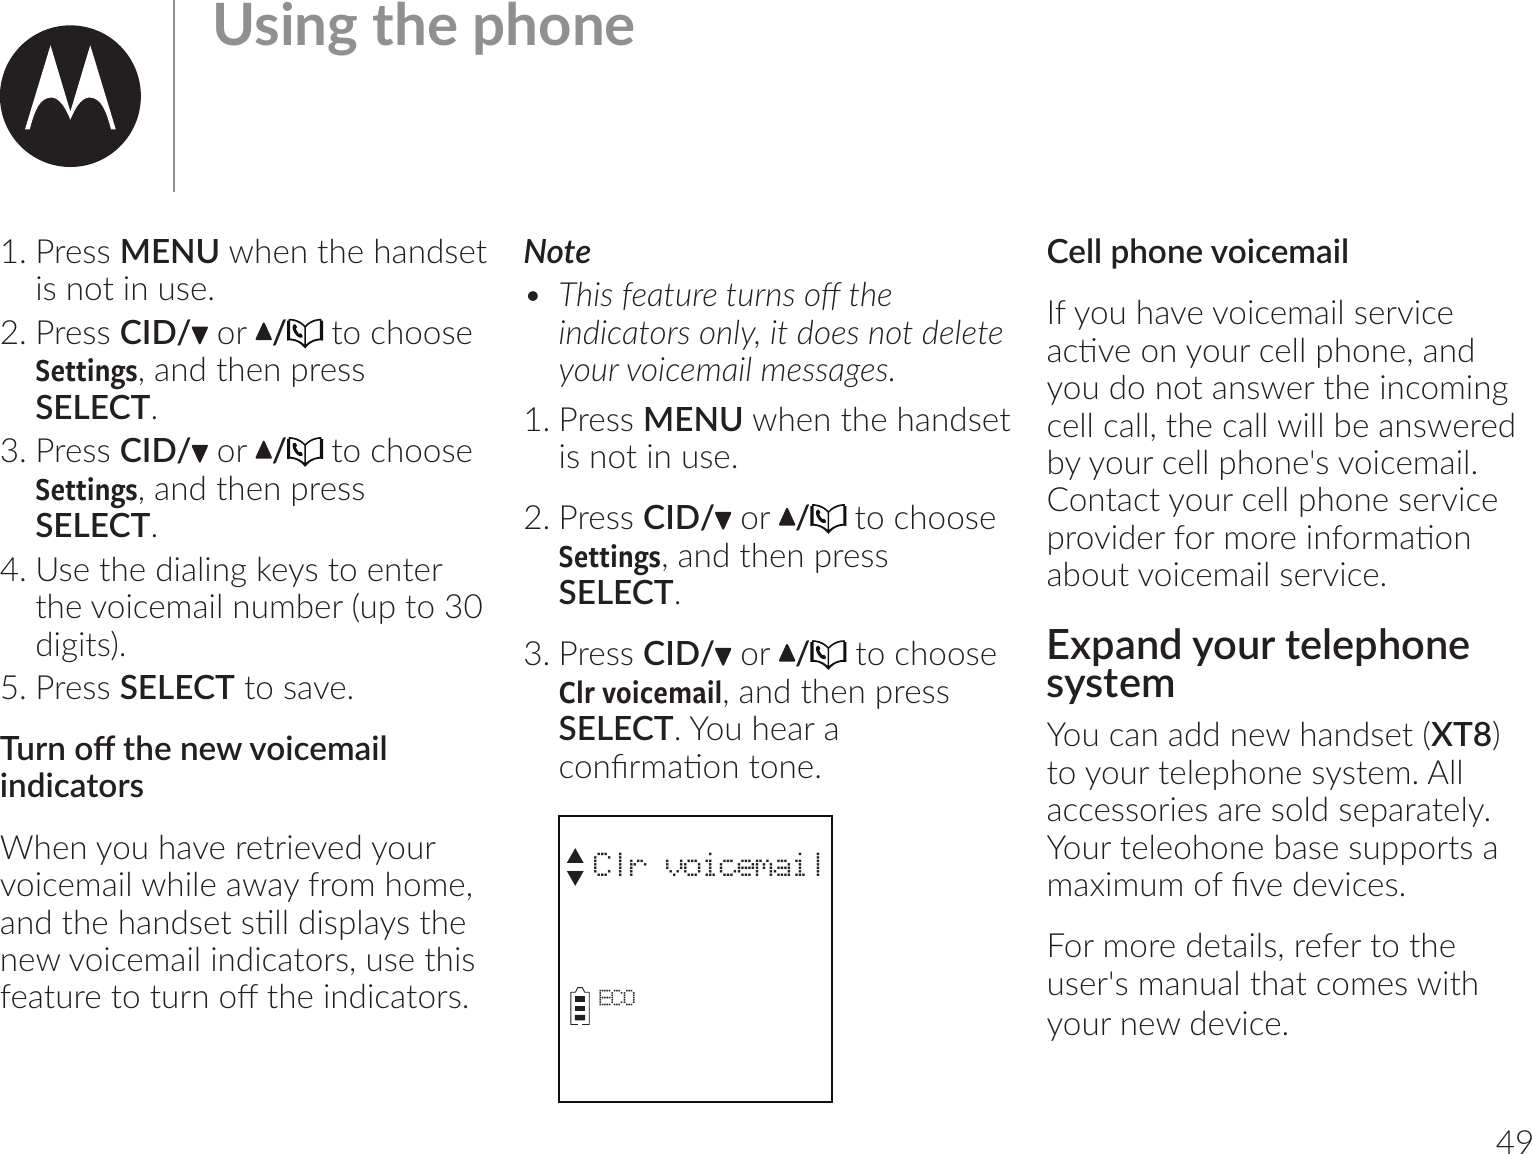 491. Press MENU when the handset is not in use.2. Press CID/  or  /  to choose Settings, and then press SELECT.3. Press CID/  or  /  to choose Settings, and then press SELECT.4. Use the dialing keys to enter the voicemail number (up to 30 digits).5. Press SELECT to save.$umo@|_;m;ob1;l-bѴindicatorsWhen you have retrieved your voicemail while away from home, -m7|_;_-m7v;|vঞѴѴ7bvrѴ-v|_;new voicemail indicators, use this =;-|u;|o|umo@|_;bm7b1-|ouvĺ Note•  $_bv=;-|u;|umvo@|_;bm7b1-|ouvomѲĶb|7o;vmo|7;Ѳ;|;ouob1;l-bѲl;vv-];vĸ1. Press MENU when the handset is not in use.2. Press CID/  or  /  to choose Settings, and then press SELECT.3. Press CID/  or  / to choose  Clr voicemail, and then press SELECT. You hear a 1omCul-ঞom|om;ĺ         Clr voicemailECOS T ;ѴѴr_om;ob1;l-bѴIf you have voicemail service -1ঞ;omou1;ѴѴr_om;ķ-m7you do not answer the incoming cell call, the call will be answered by your cell phone&apos;s voicemail. Contact your cell phone service ruob7;u=oulou;bm=oul-ঞomabout voicemail service.Expand your telephone systemYou can add new handset (XT8) to your telephone system. All accessories are sold separately. Your teleohone base supports a l-bllo=C;7;b1;vĺFor more details, refer to the user&apos;s manual that comes with your new device.&amp;vbm]|_;r_om;